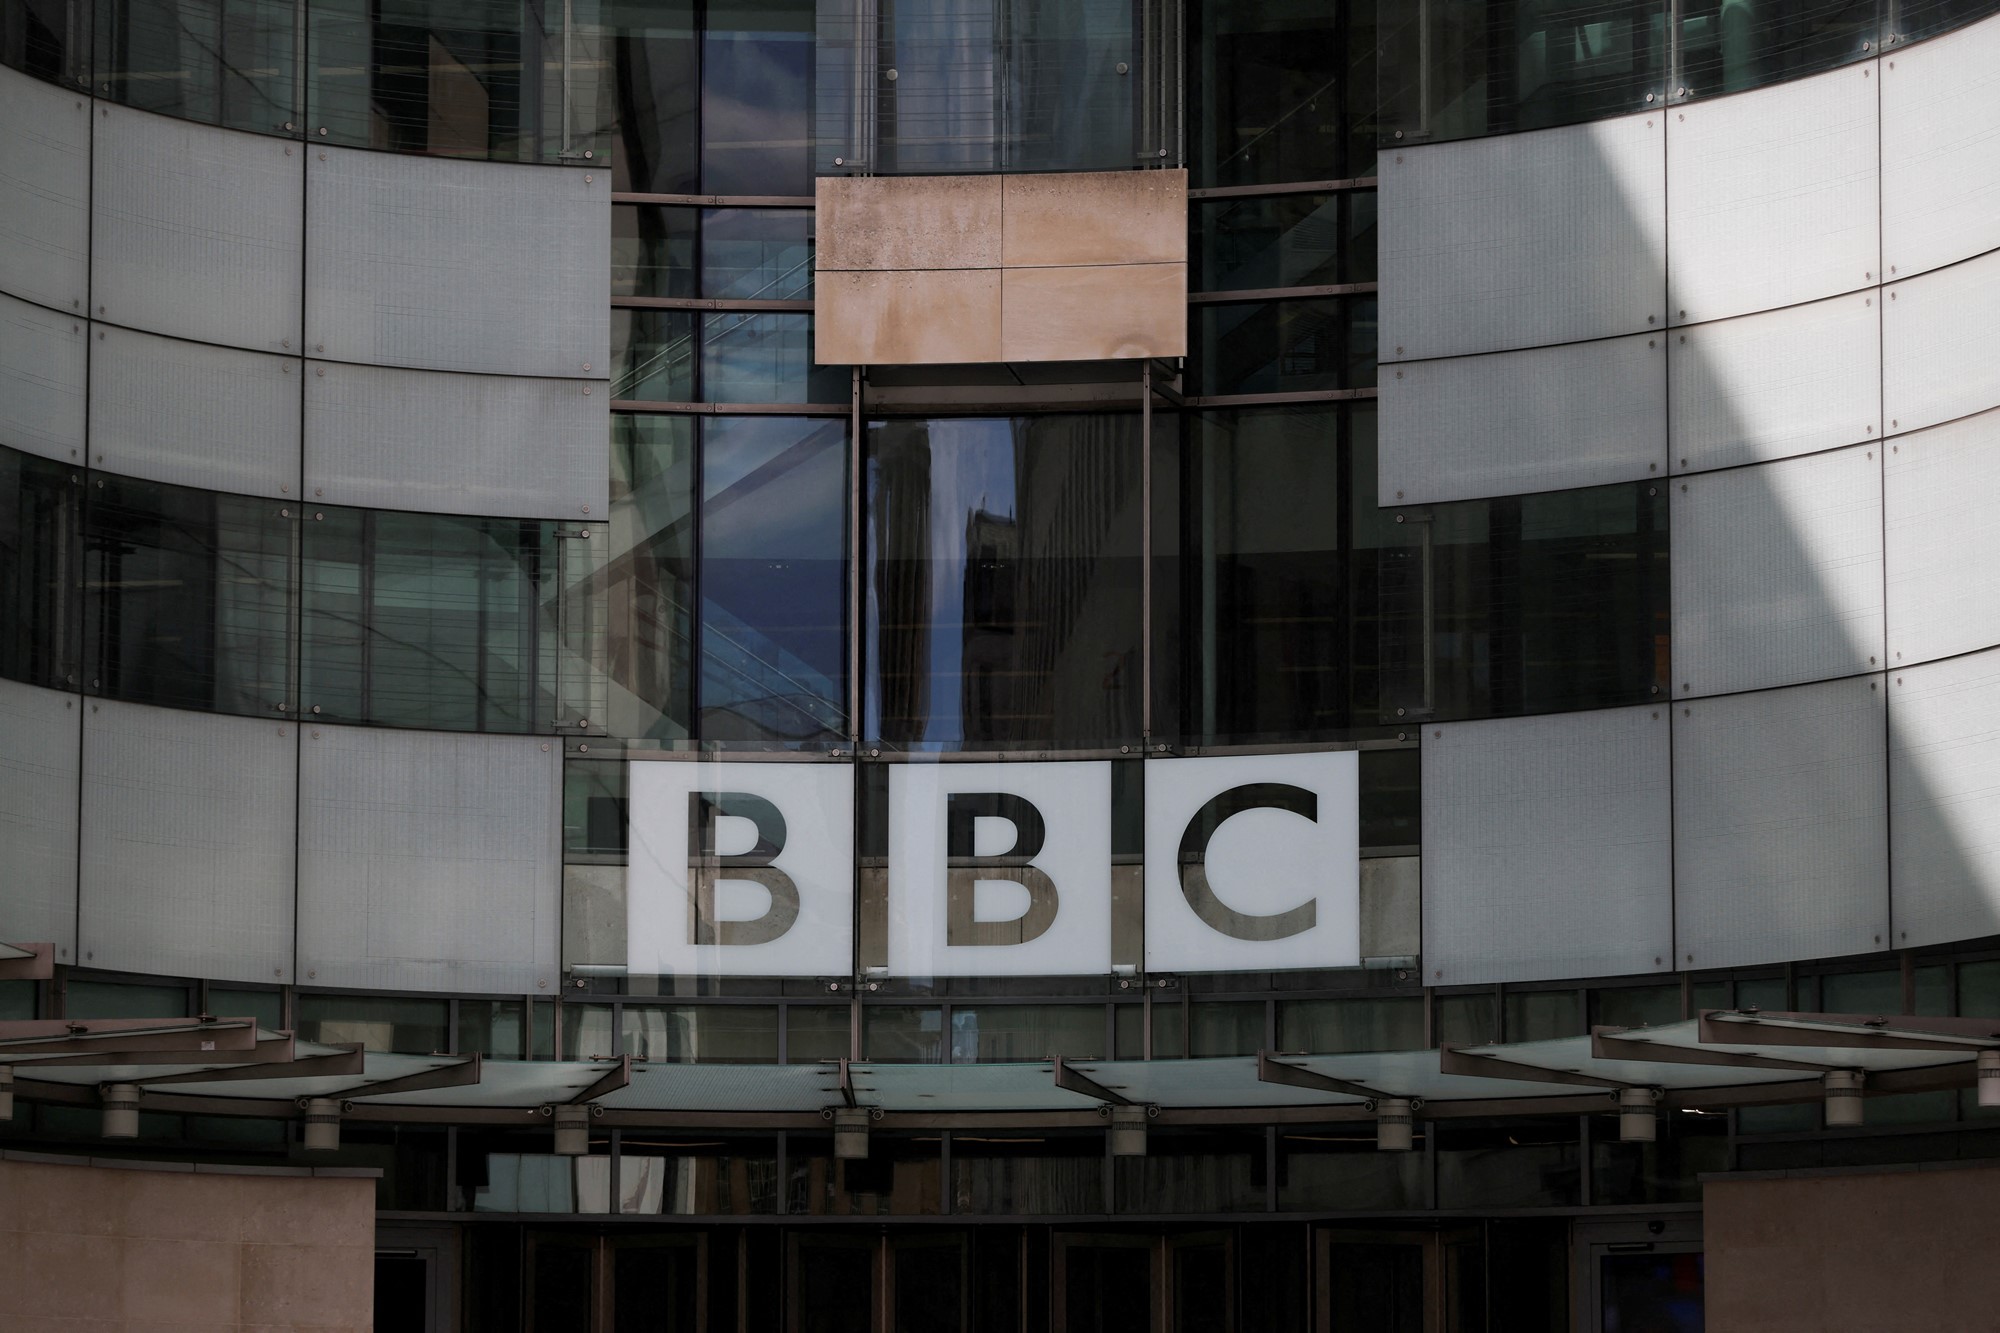 The BBC logo on the front of their main building.